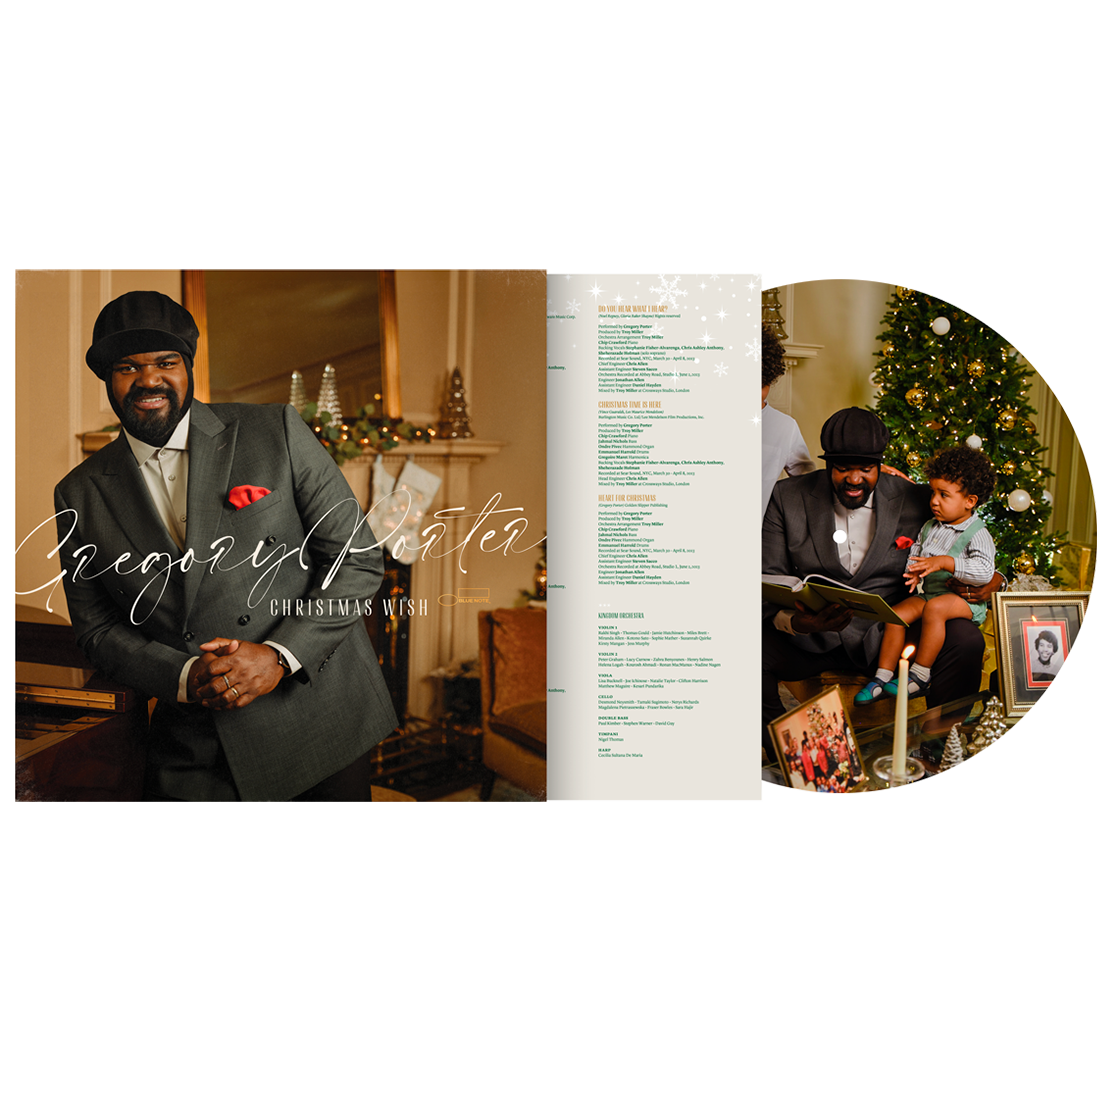 Gregory Porter - Christmas Wish Exclusive picture disc